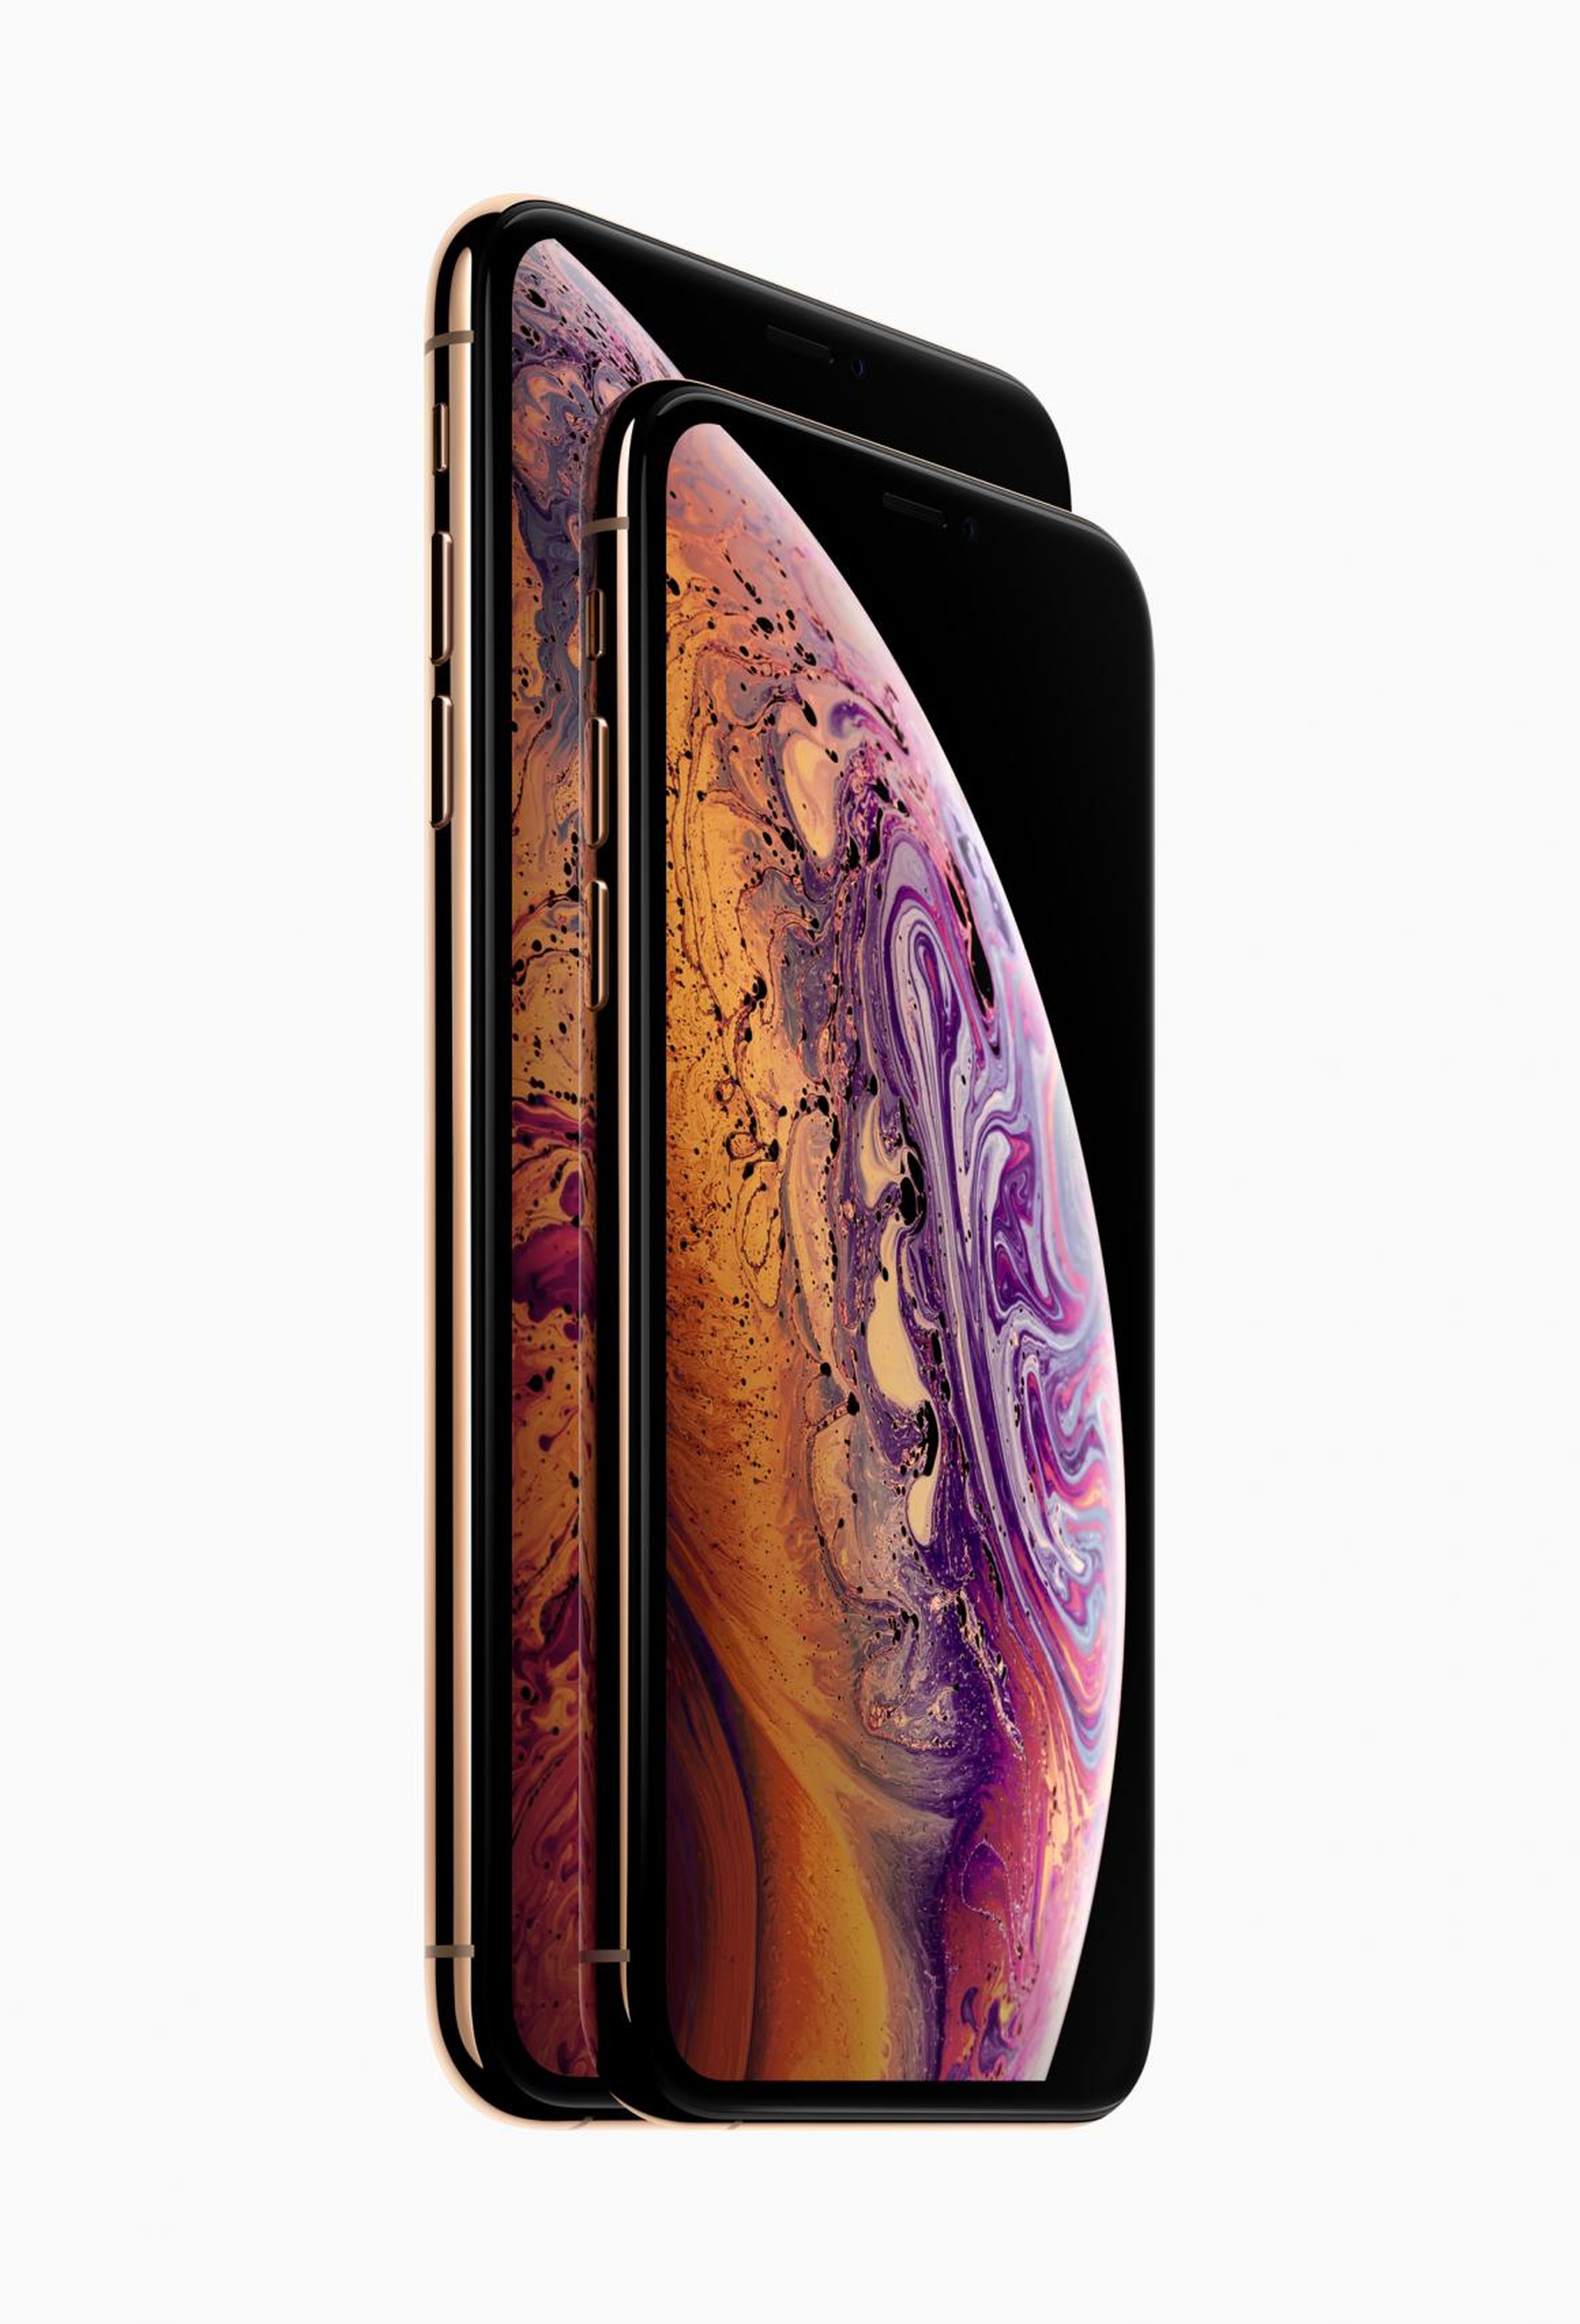 Apple's new iPhone XS models start at $1,000.